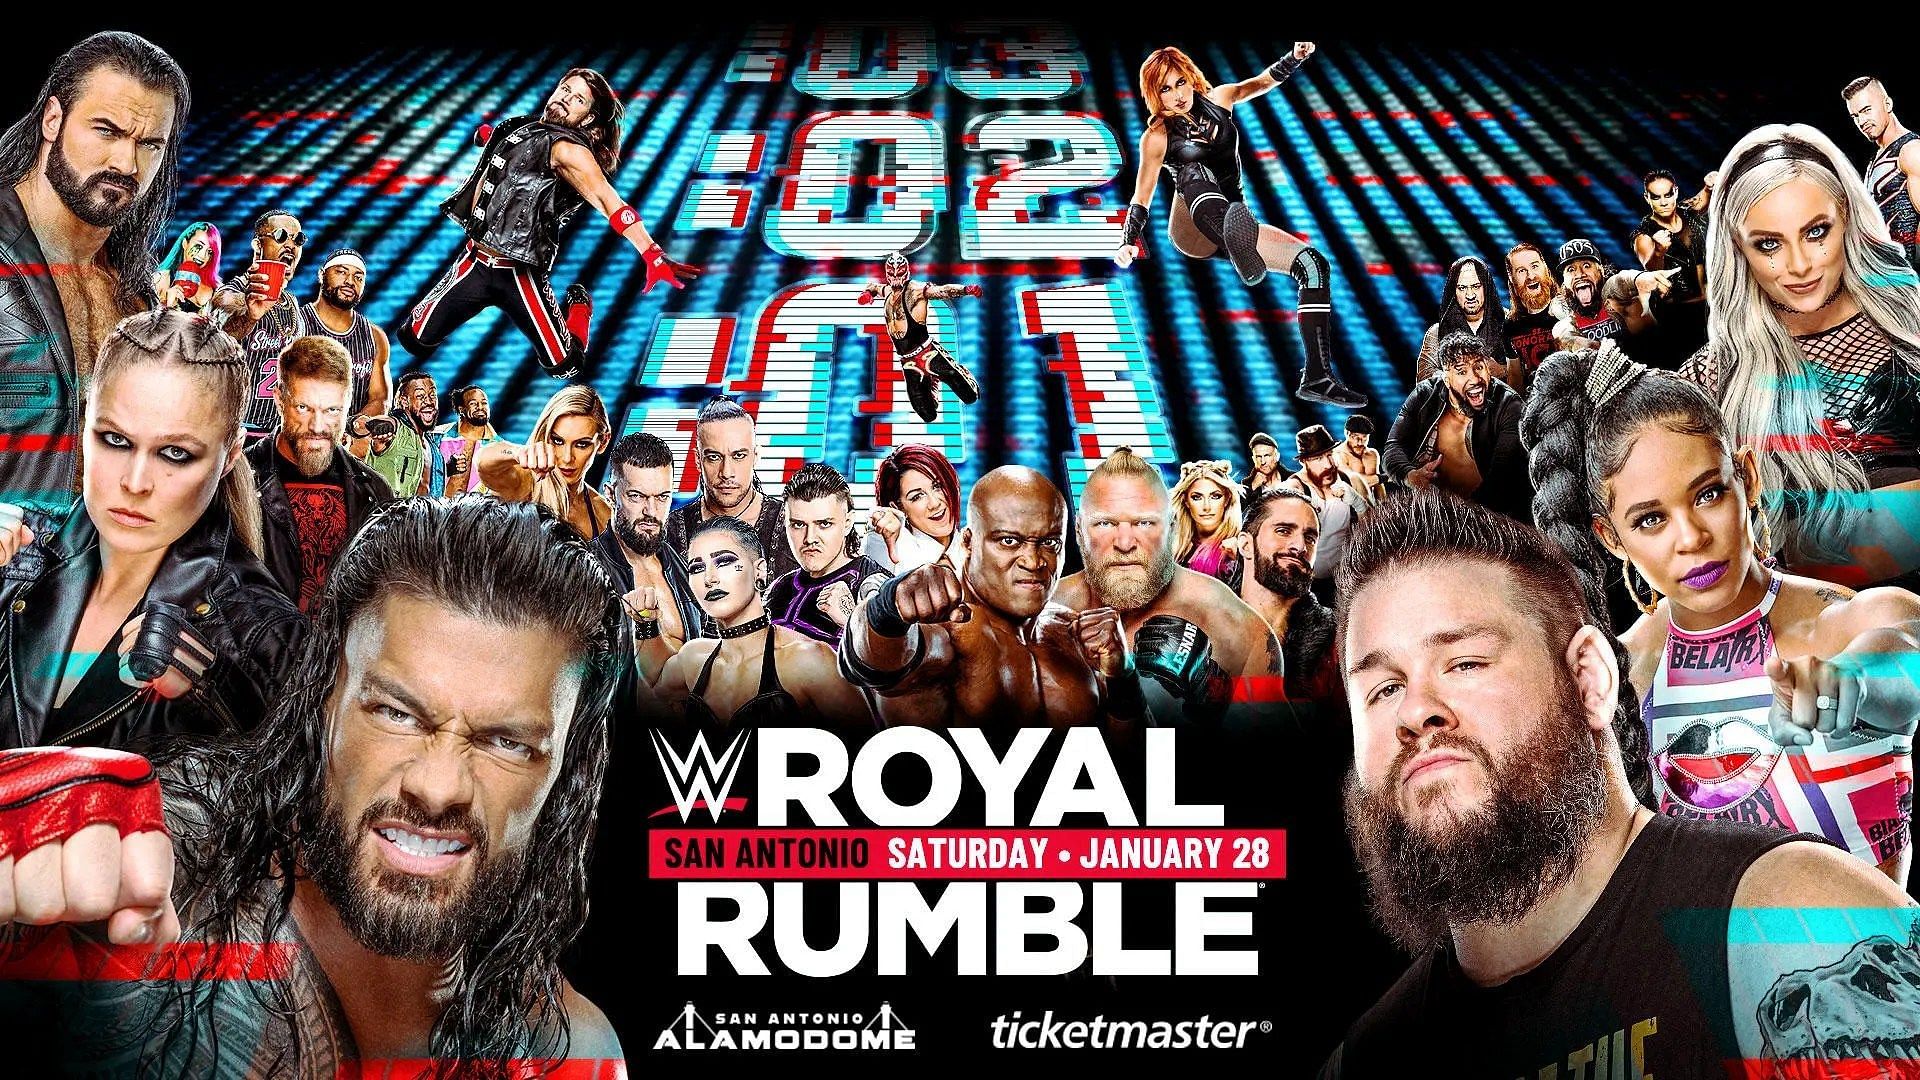 With the Royal Rumble around the corner, people are ready to make some bets.